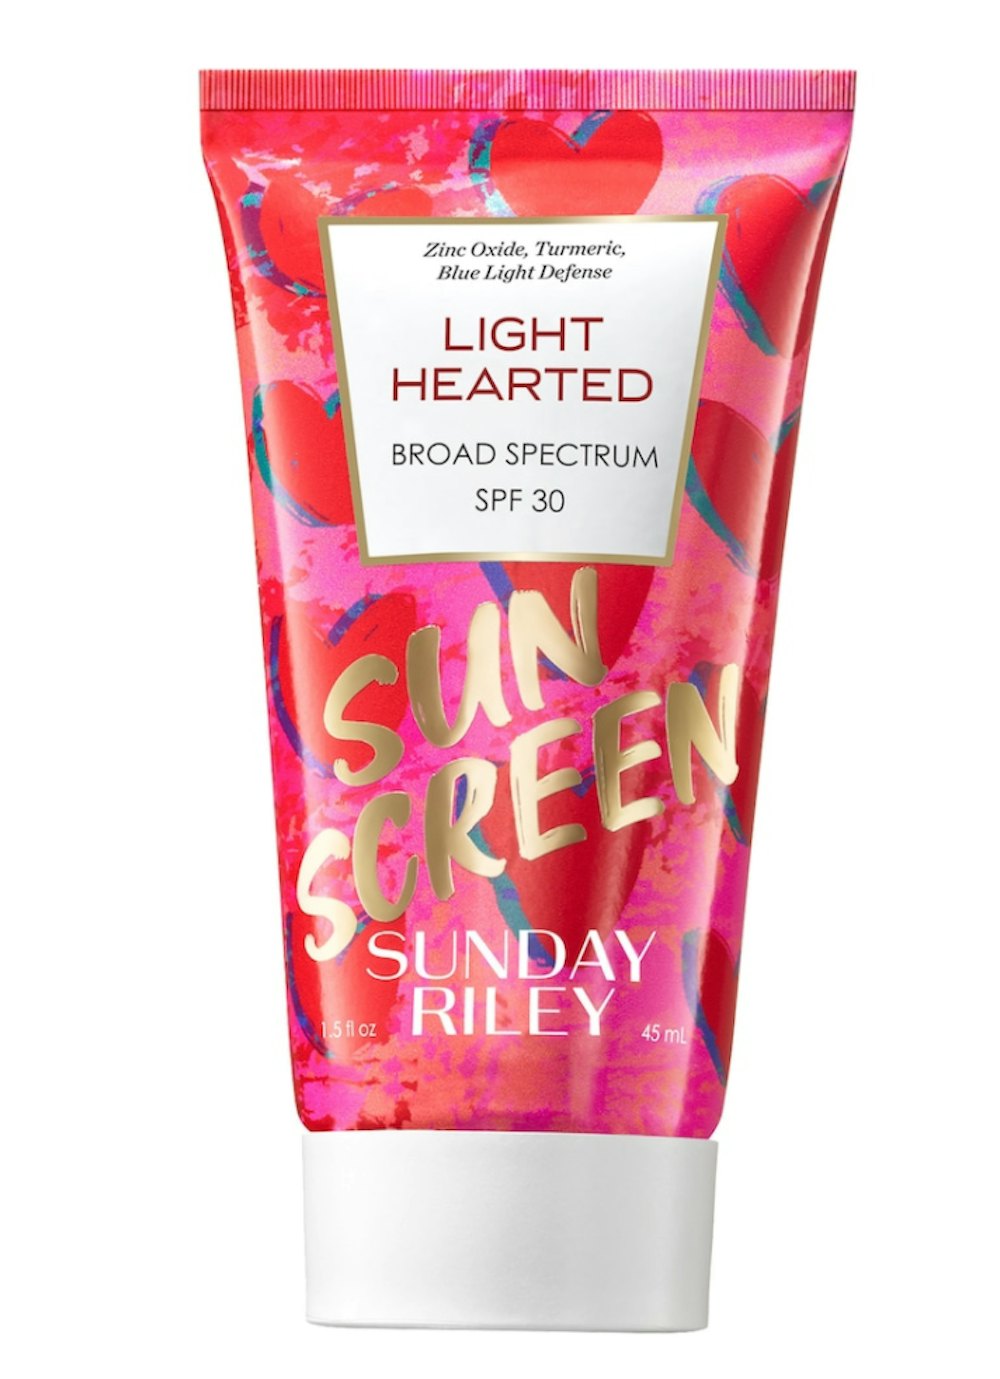 Sunday Riley Light Hearted Broad Spectrum SPF 30 Daily Face Sunscreen